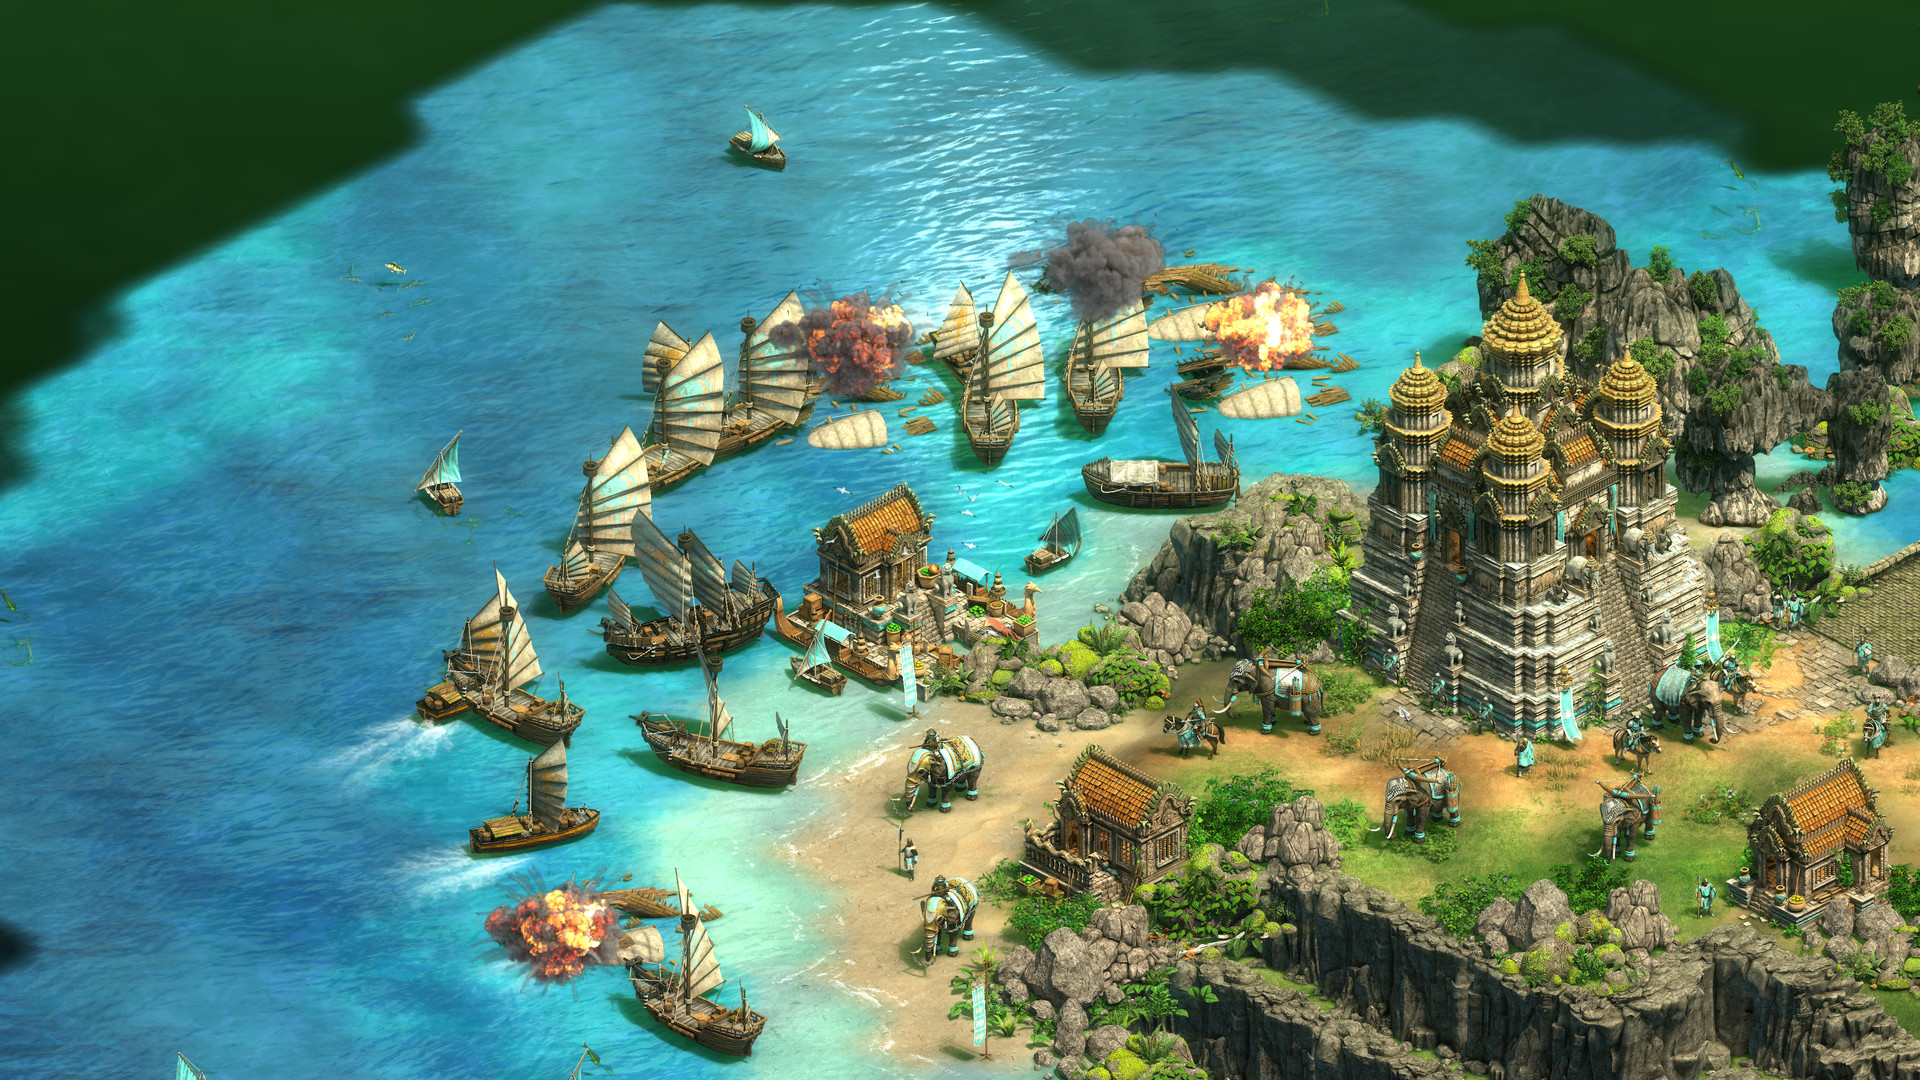 Age of Empires II: Definitive Edition Soundtrack Featured Screenshot #1